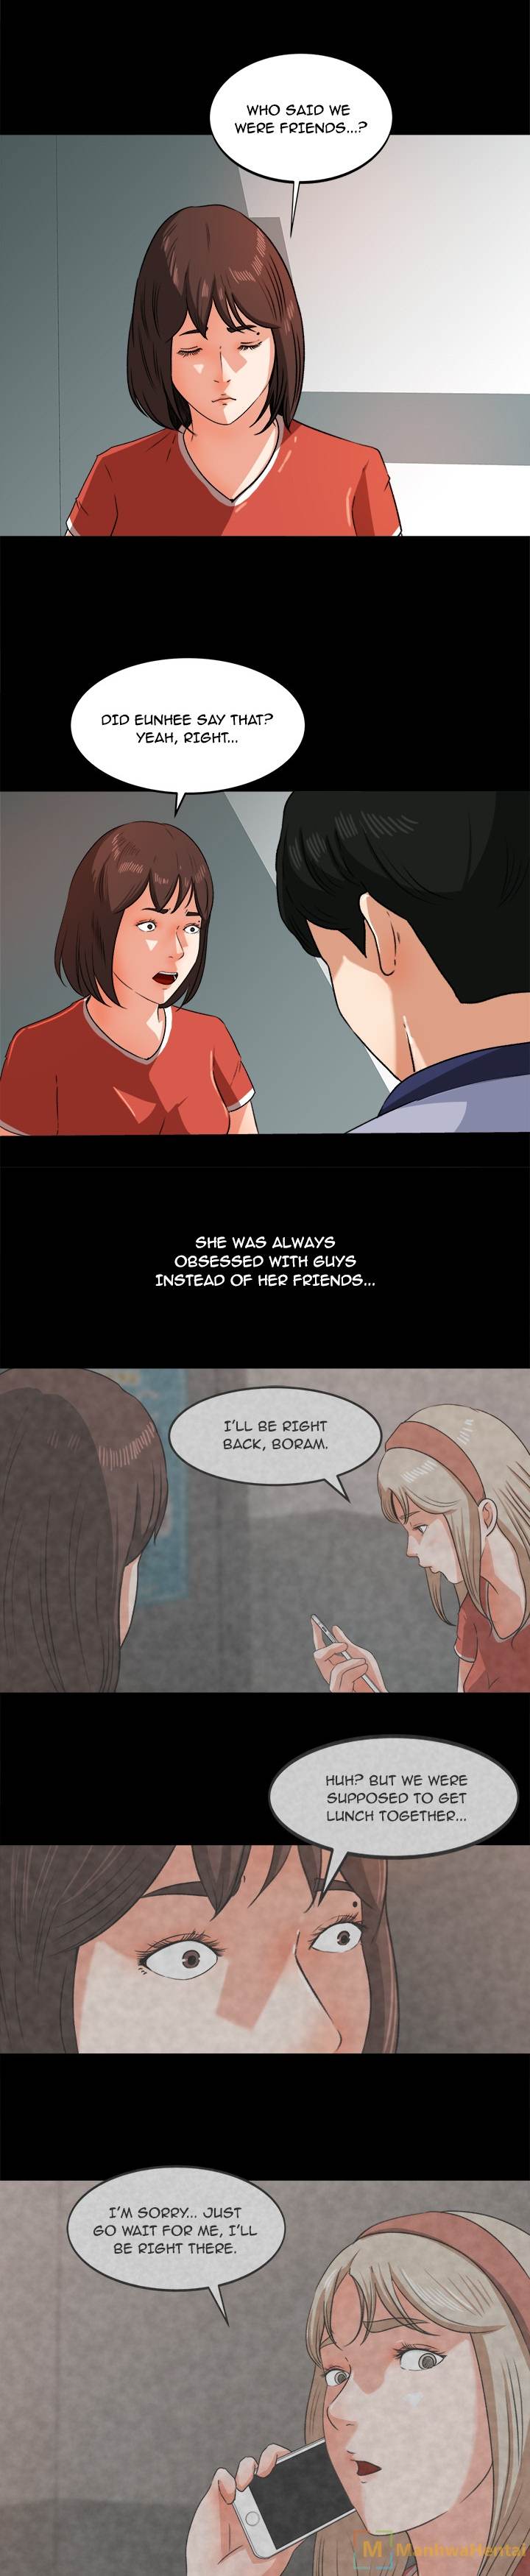 Inside the Uniform - Chapter 26 Page 9